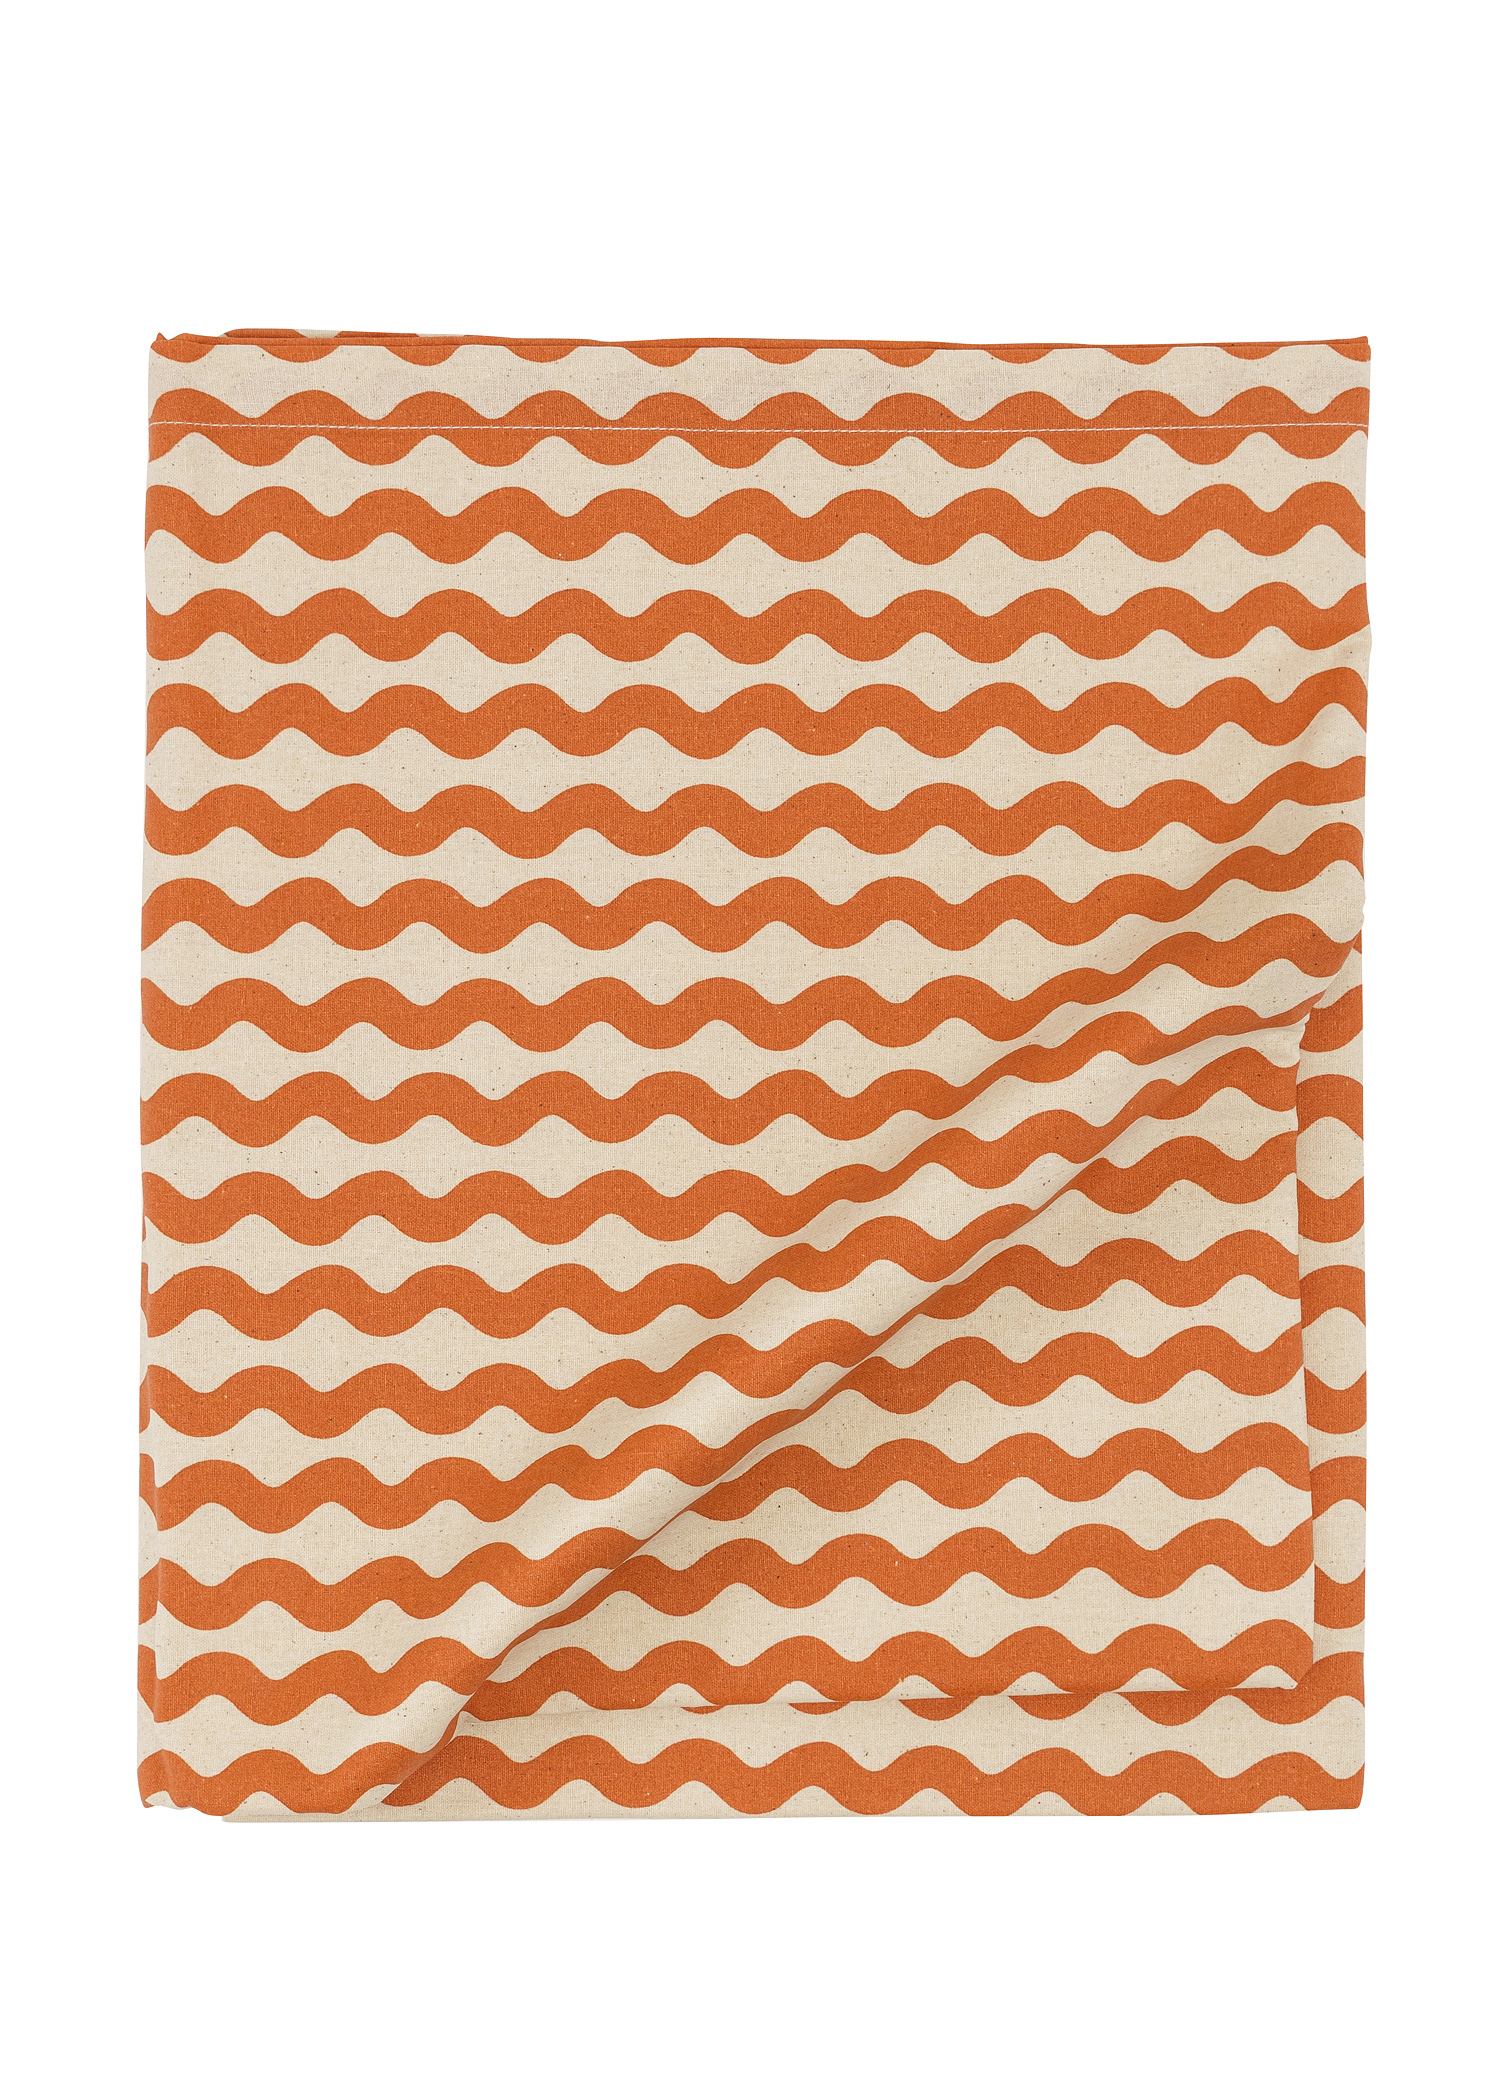 Patterned oil cloth Image 0